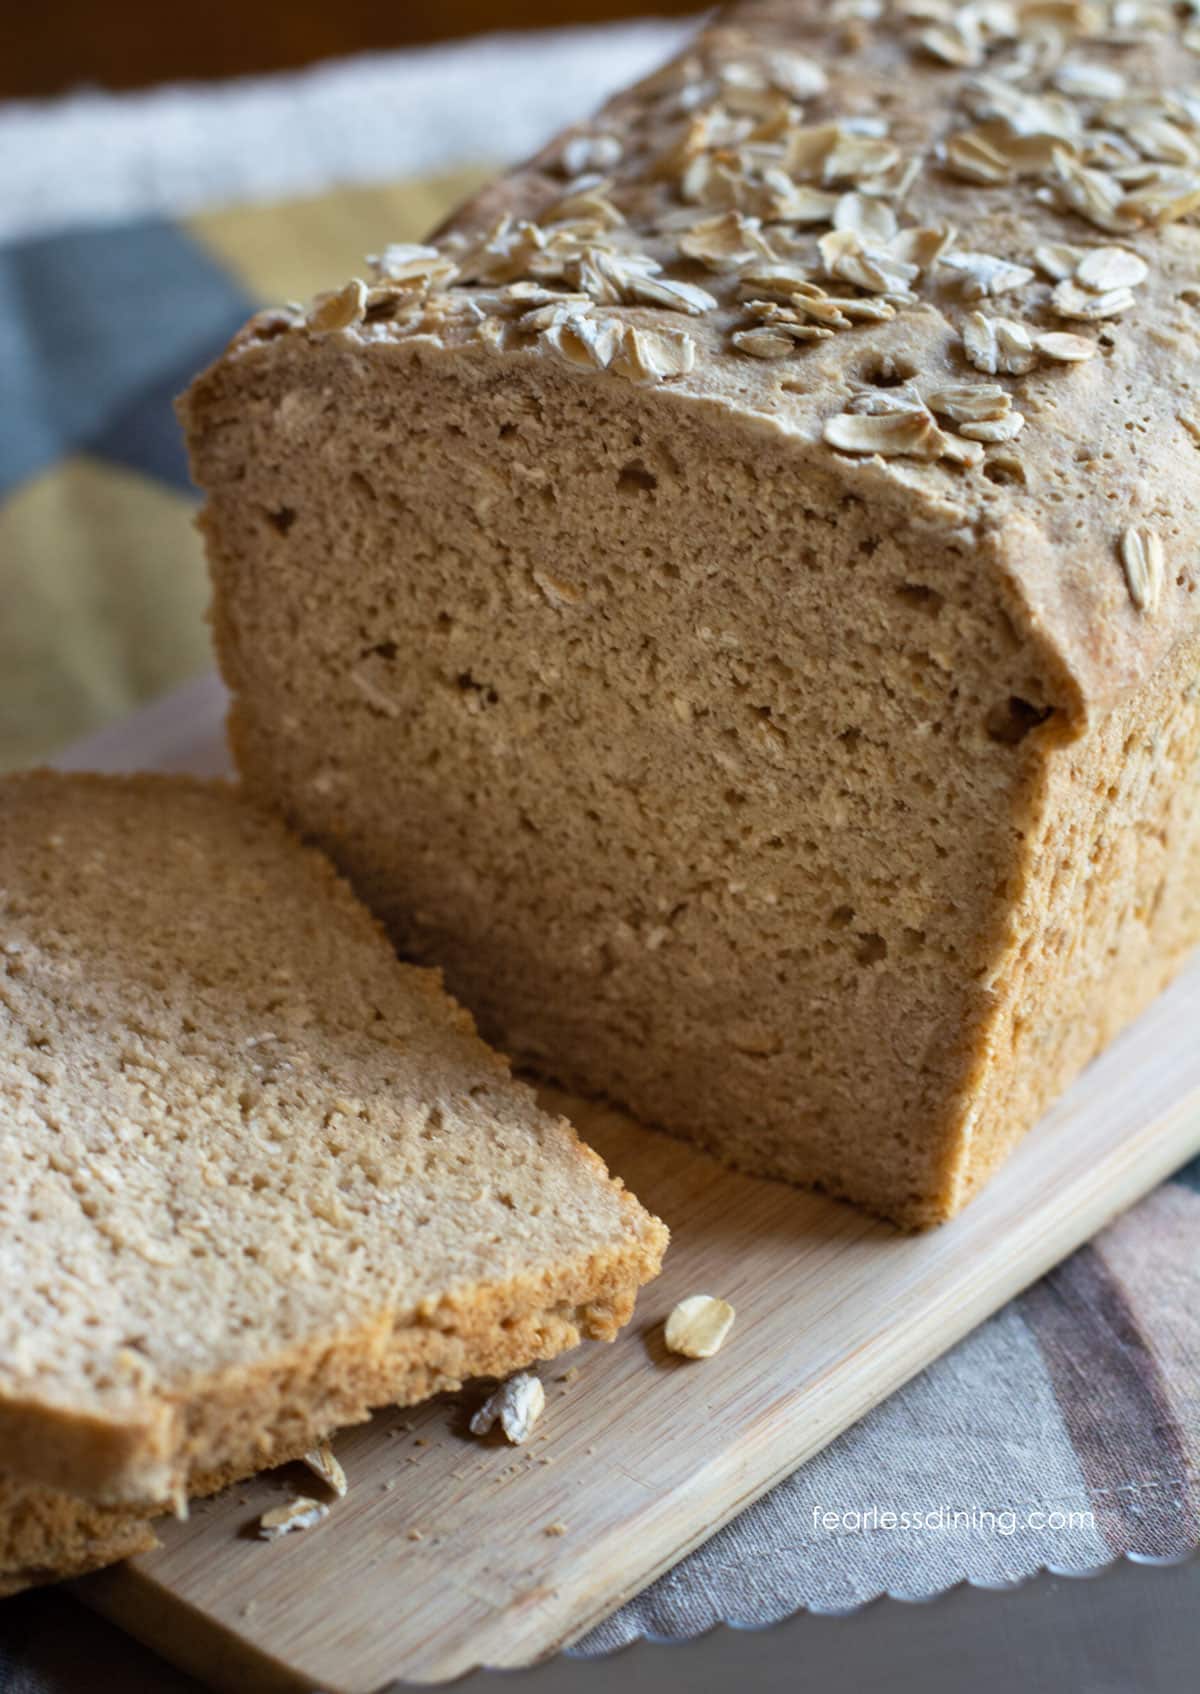 Gluten free oat bread sliced so you can see the inside.